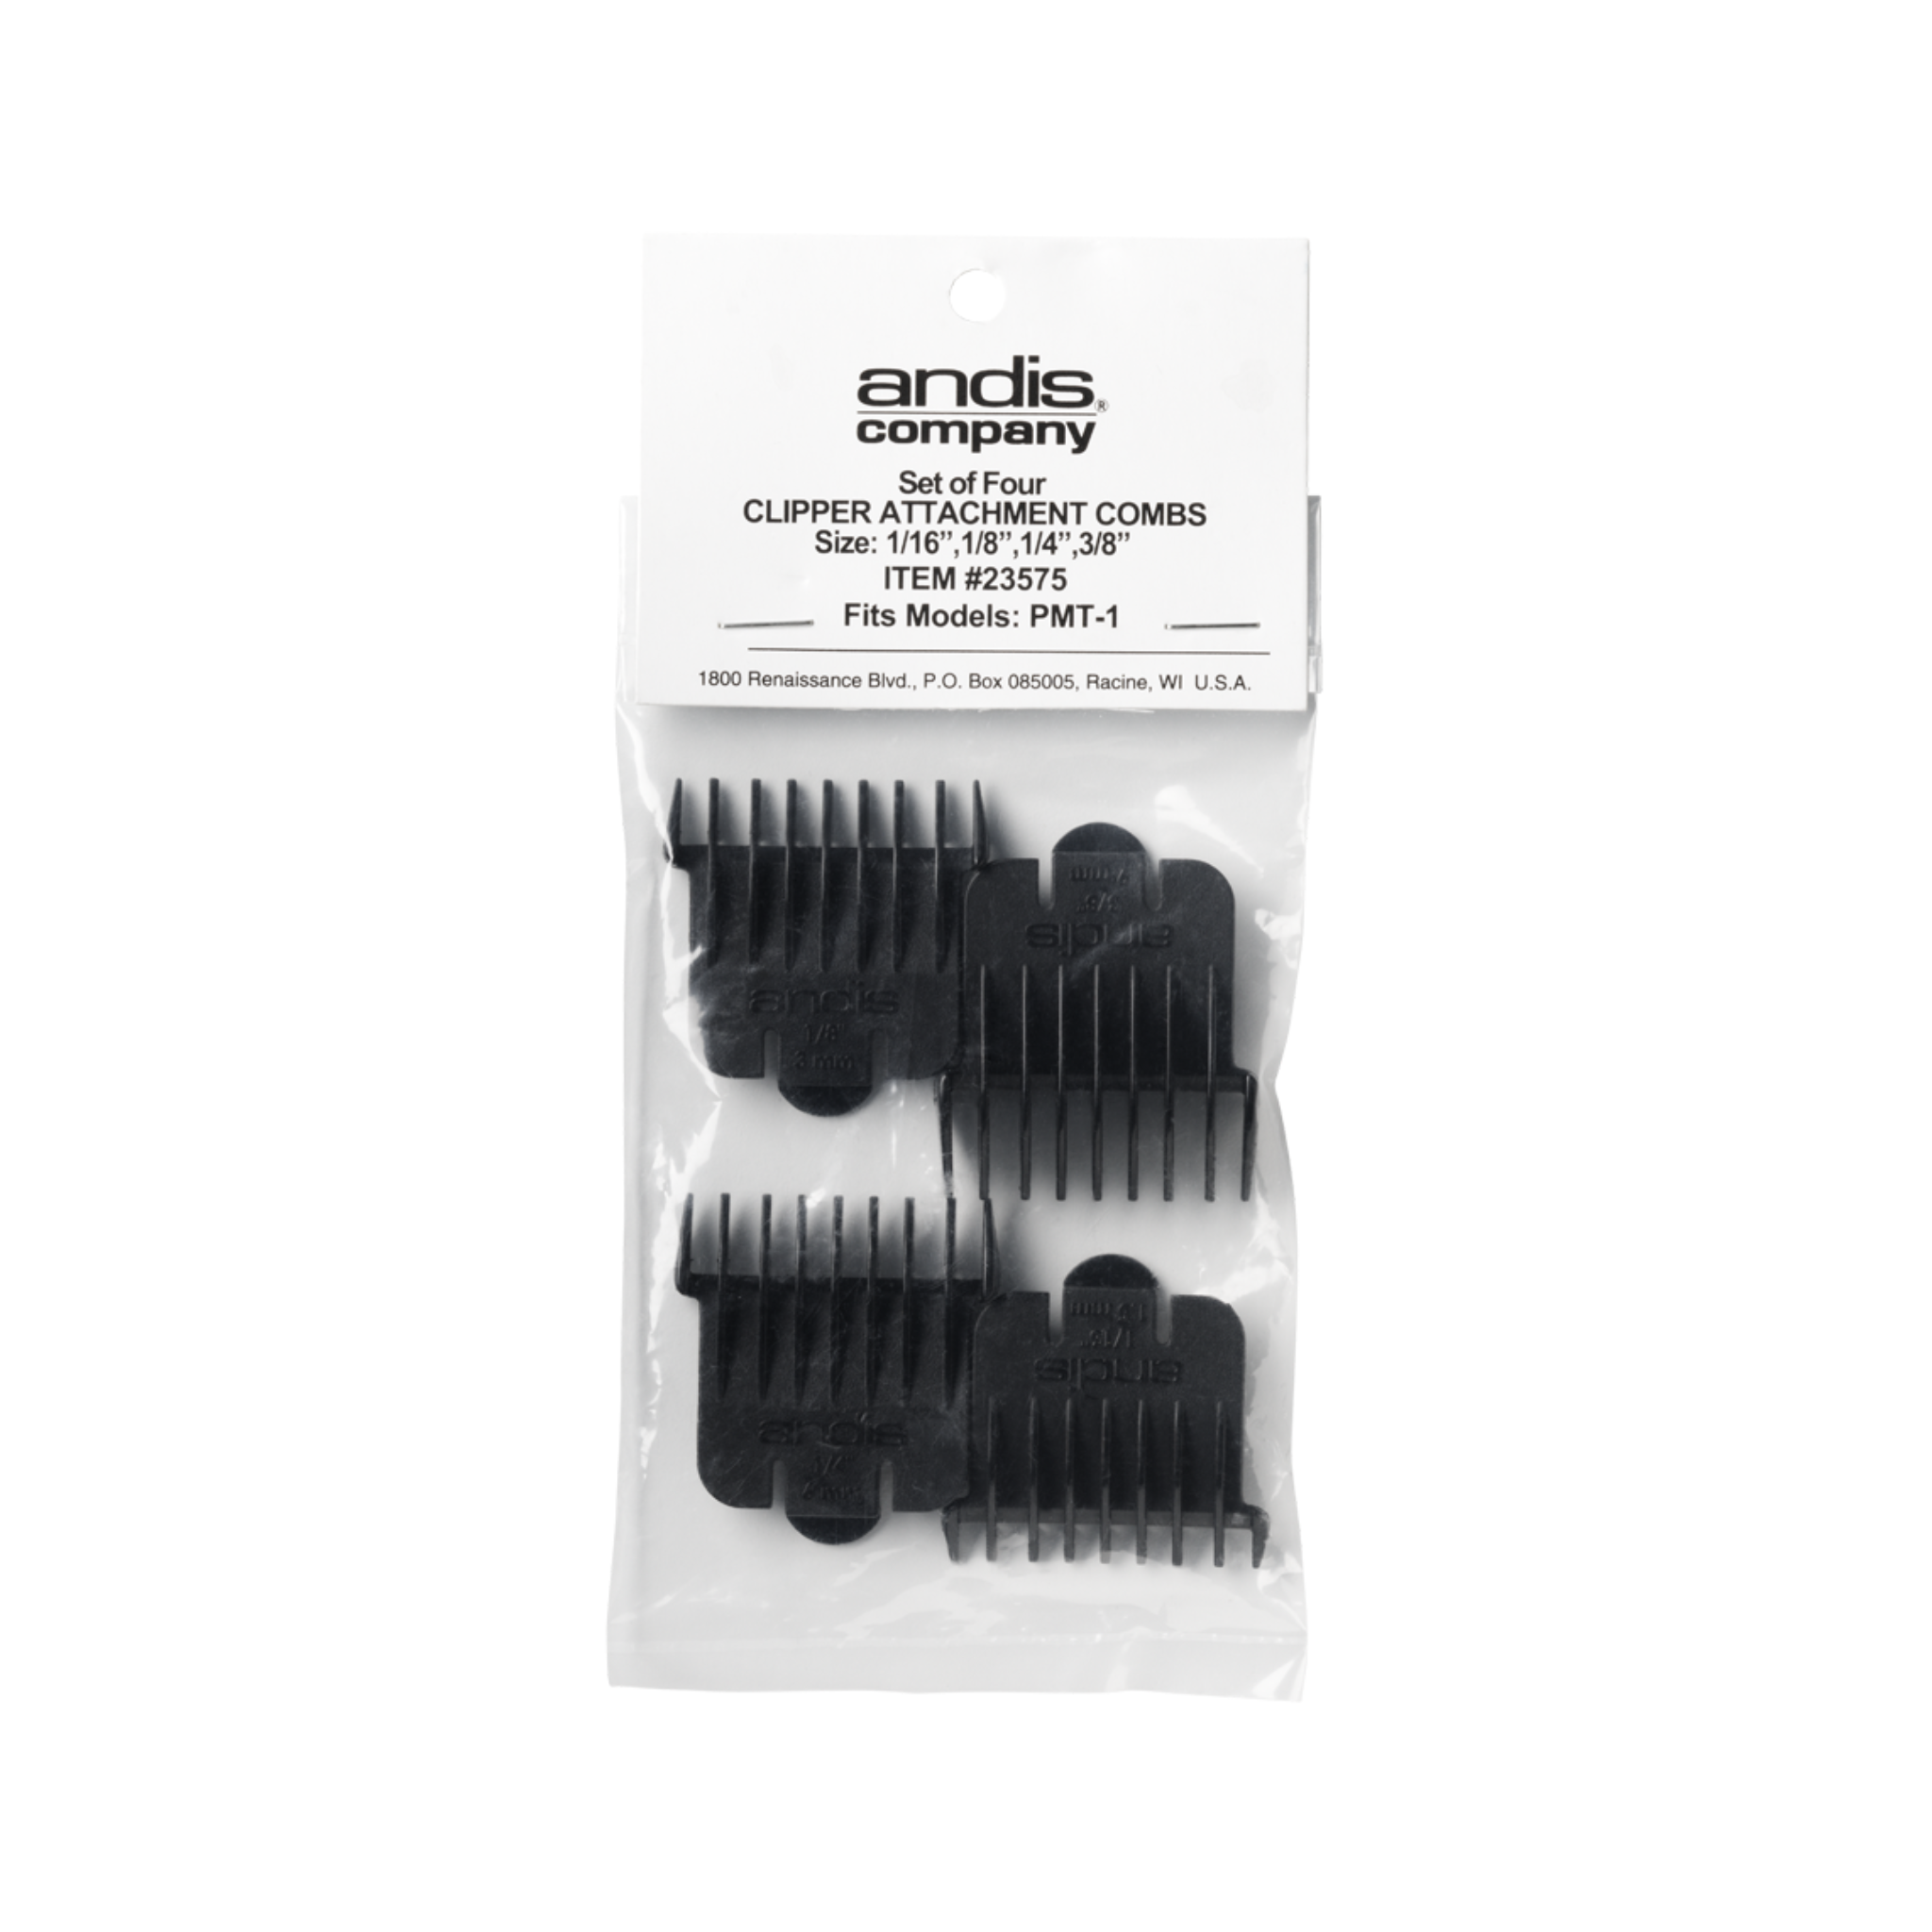 Snap-On Blade Attachment Combs (4 Comb Set)